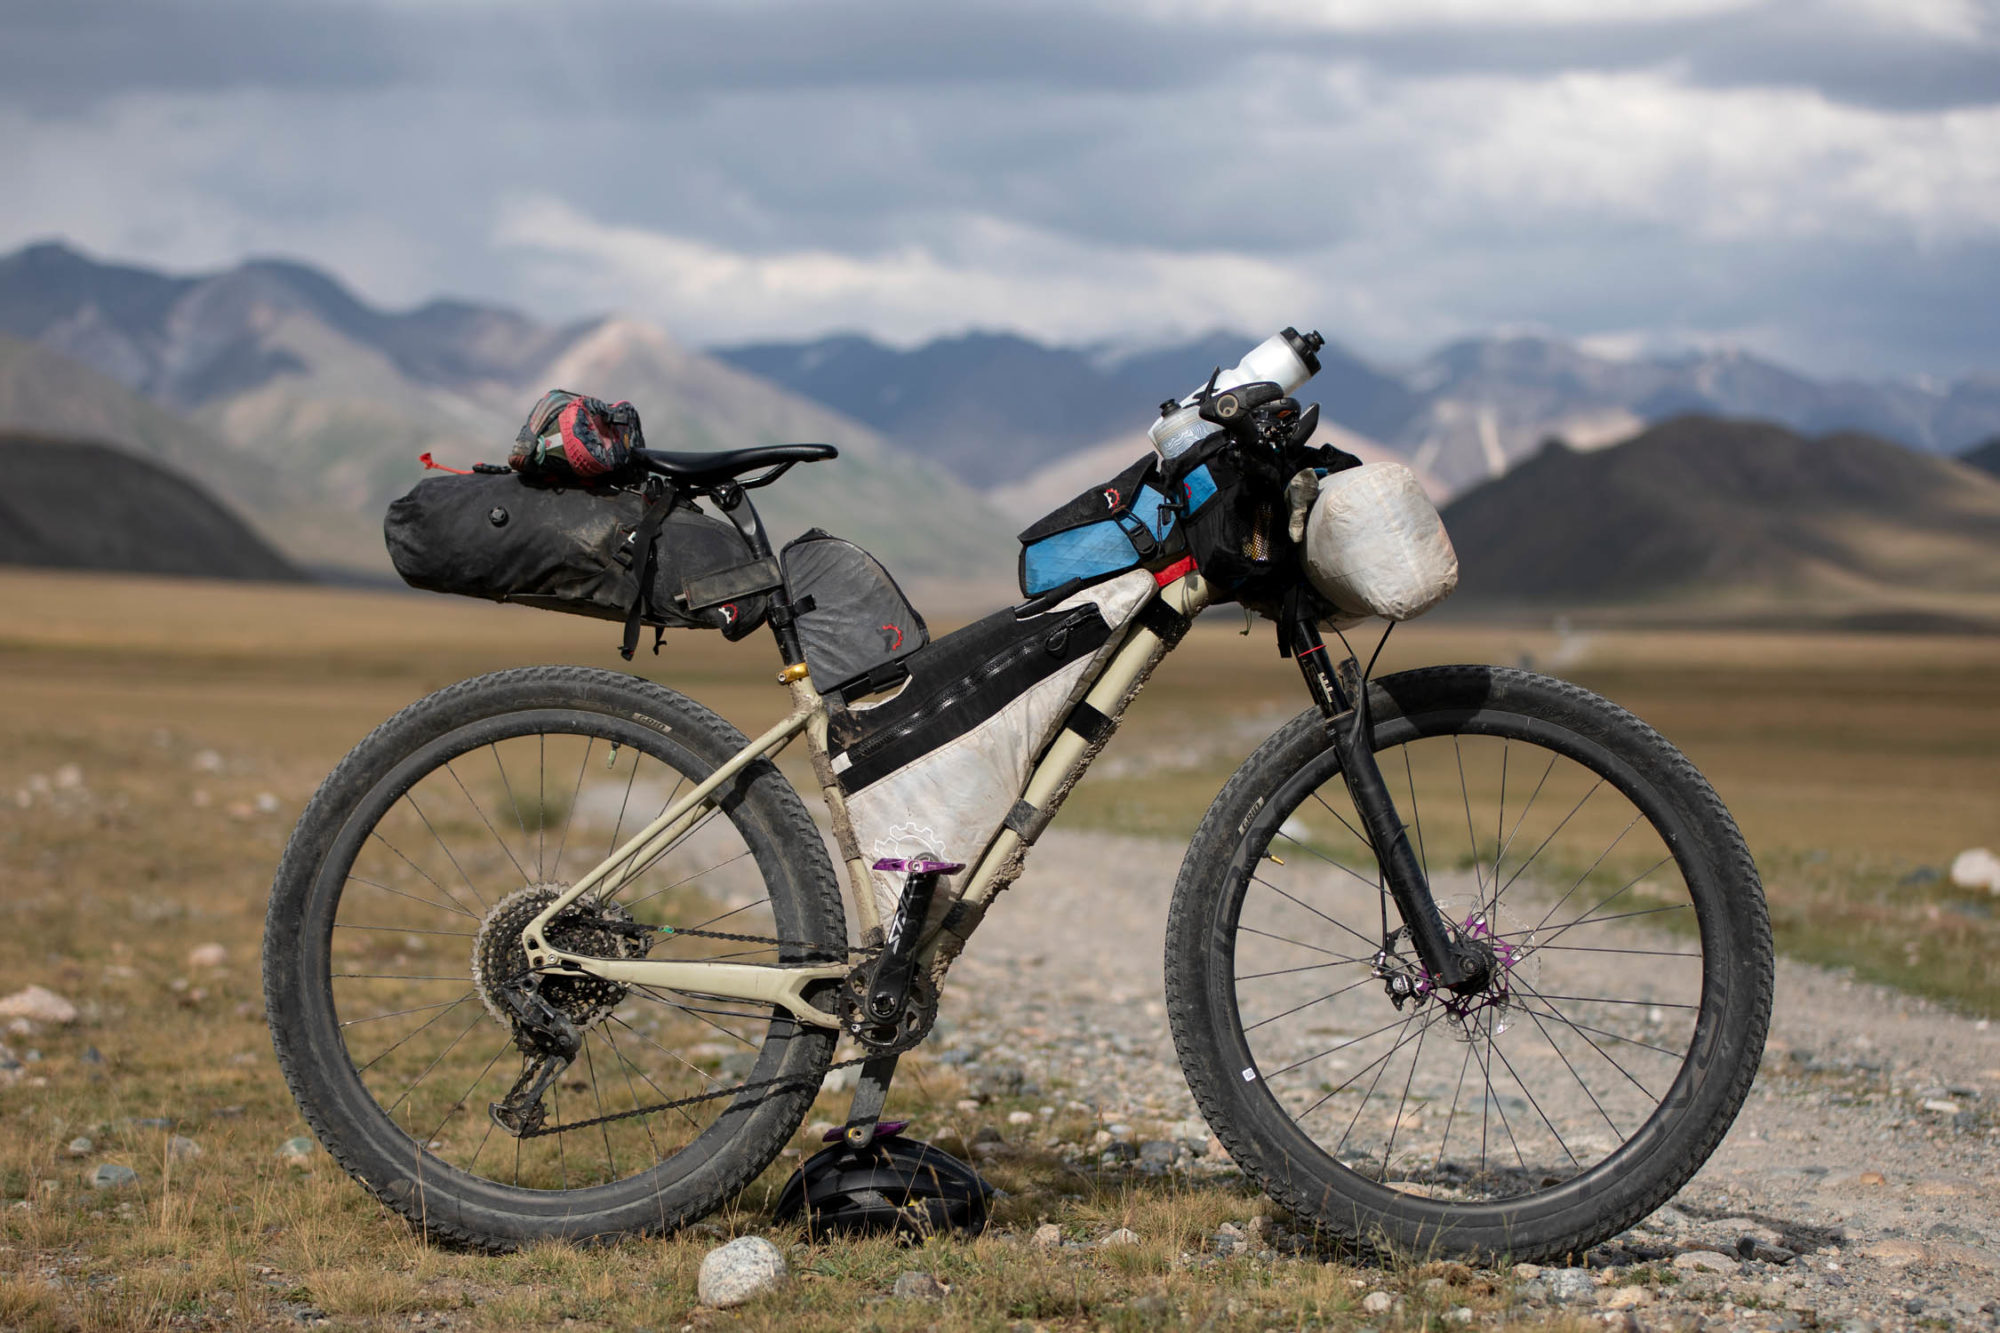 Lael Wilcox's 2019 Silk Road Mountain Race Rig and Kit